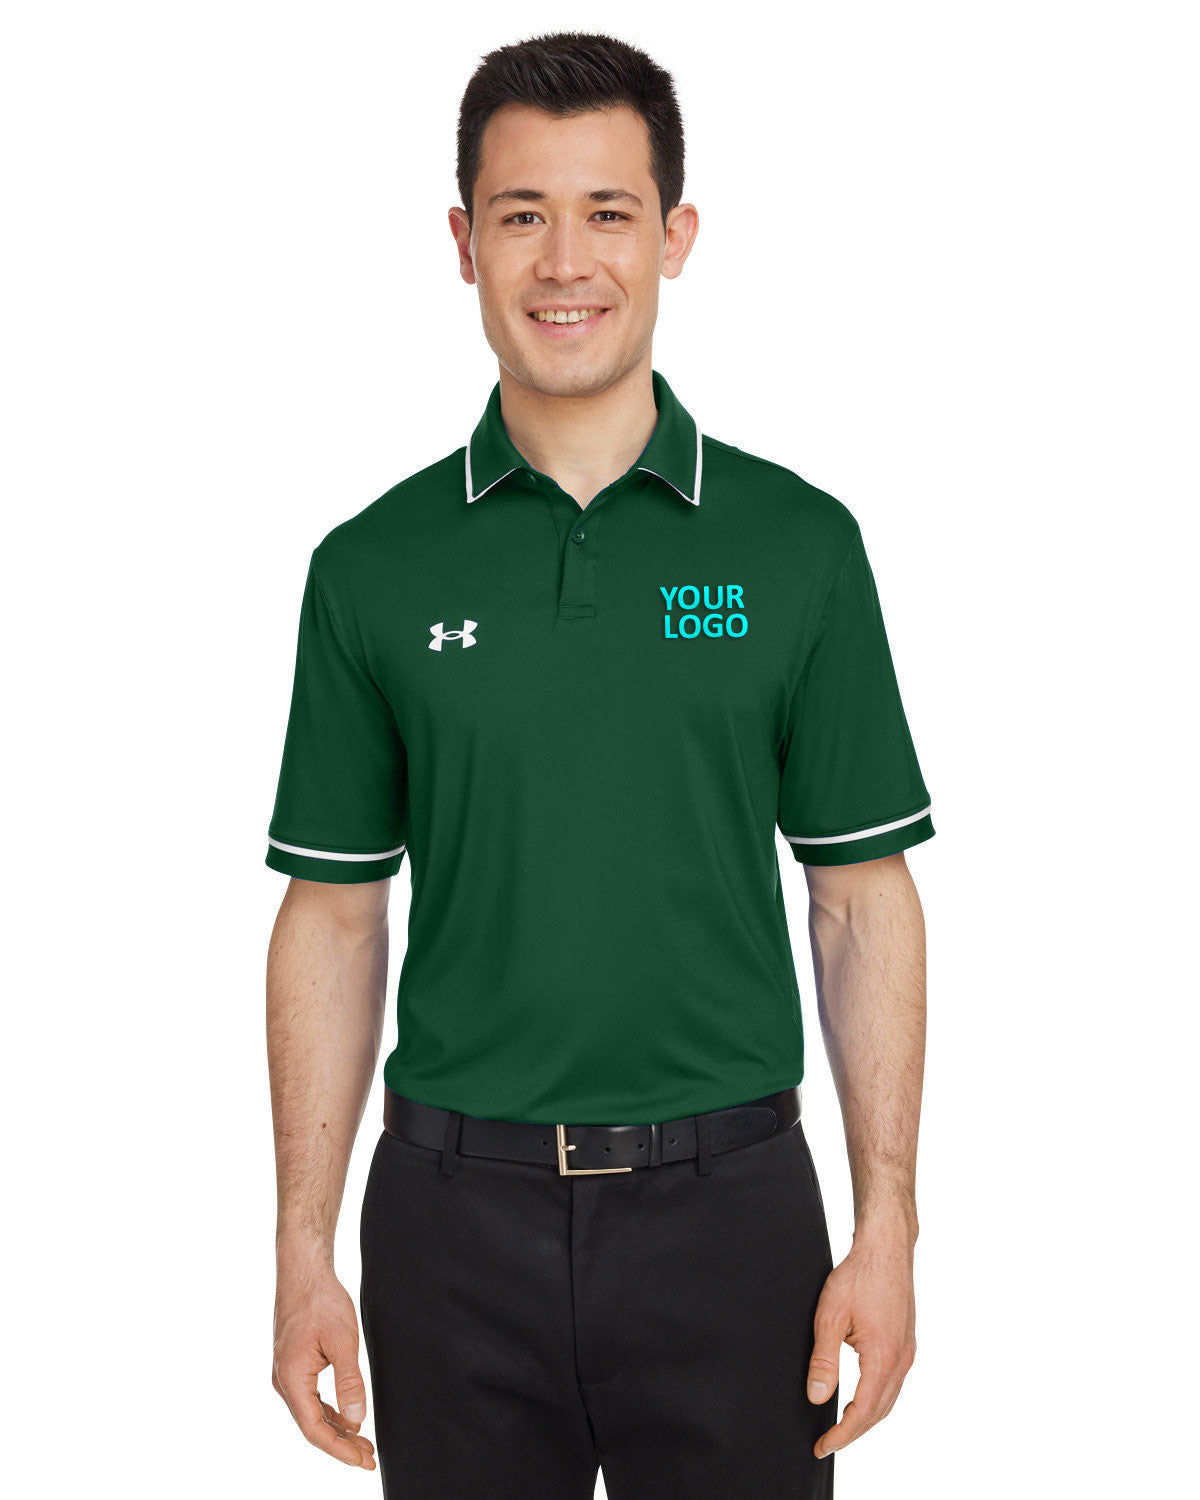 Under Armour Men's Tipped Teams Performance Branded Polos, Forest Green